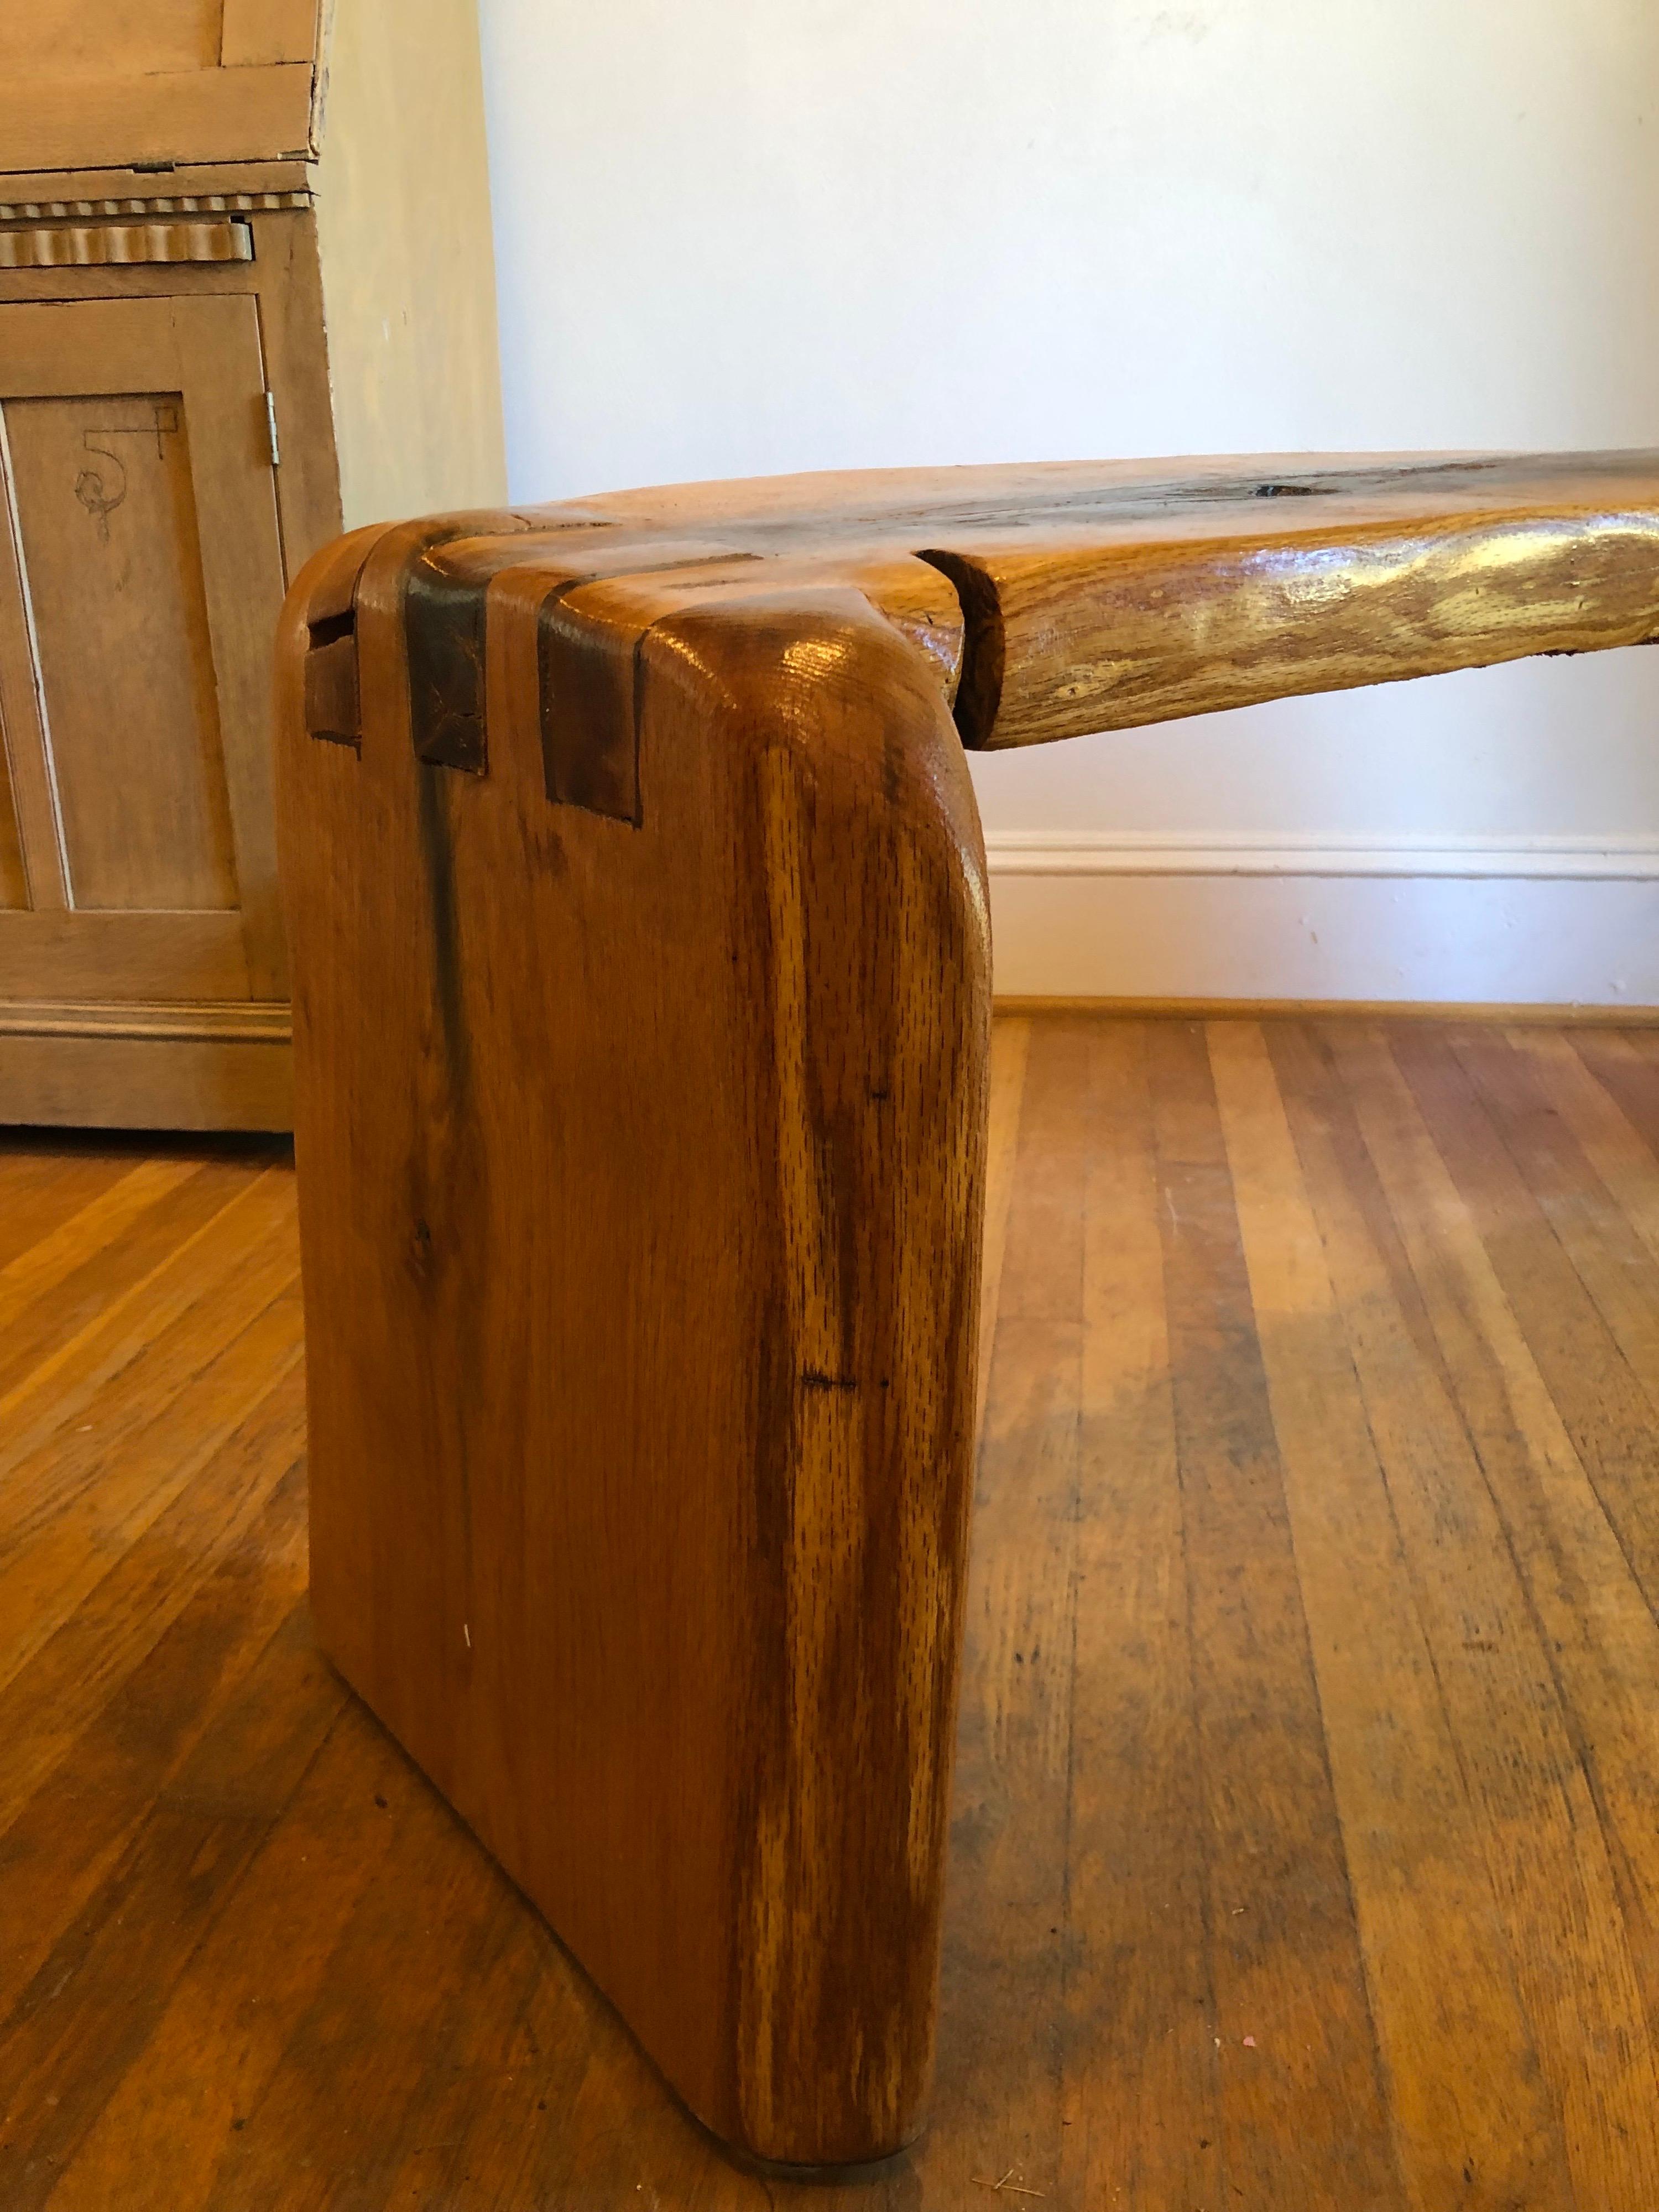 Solid hand made live edge bench from North Carolina Artisan. Modern curved lines with natural aged and unique solid wood.
Could also be used as a coffee table.